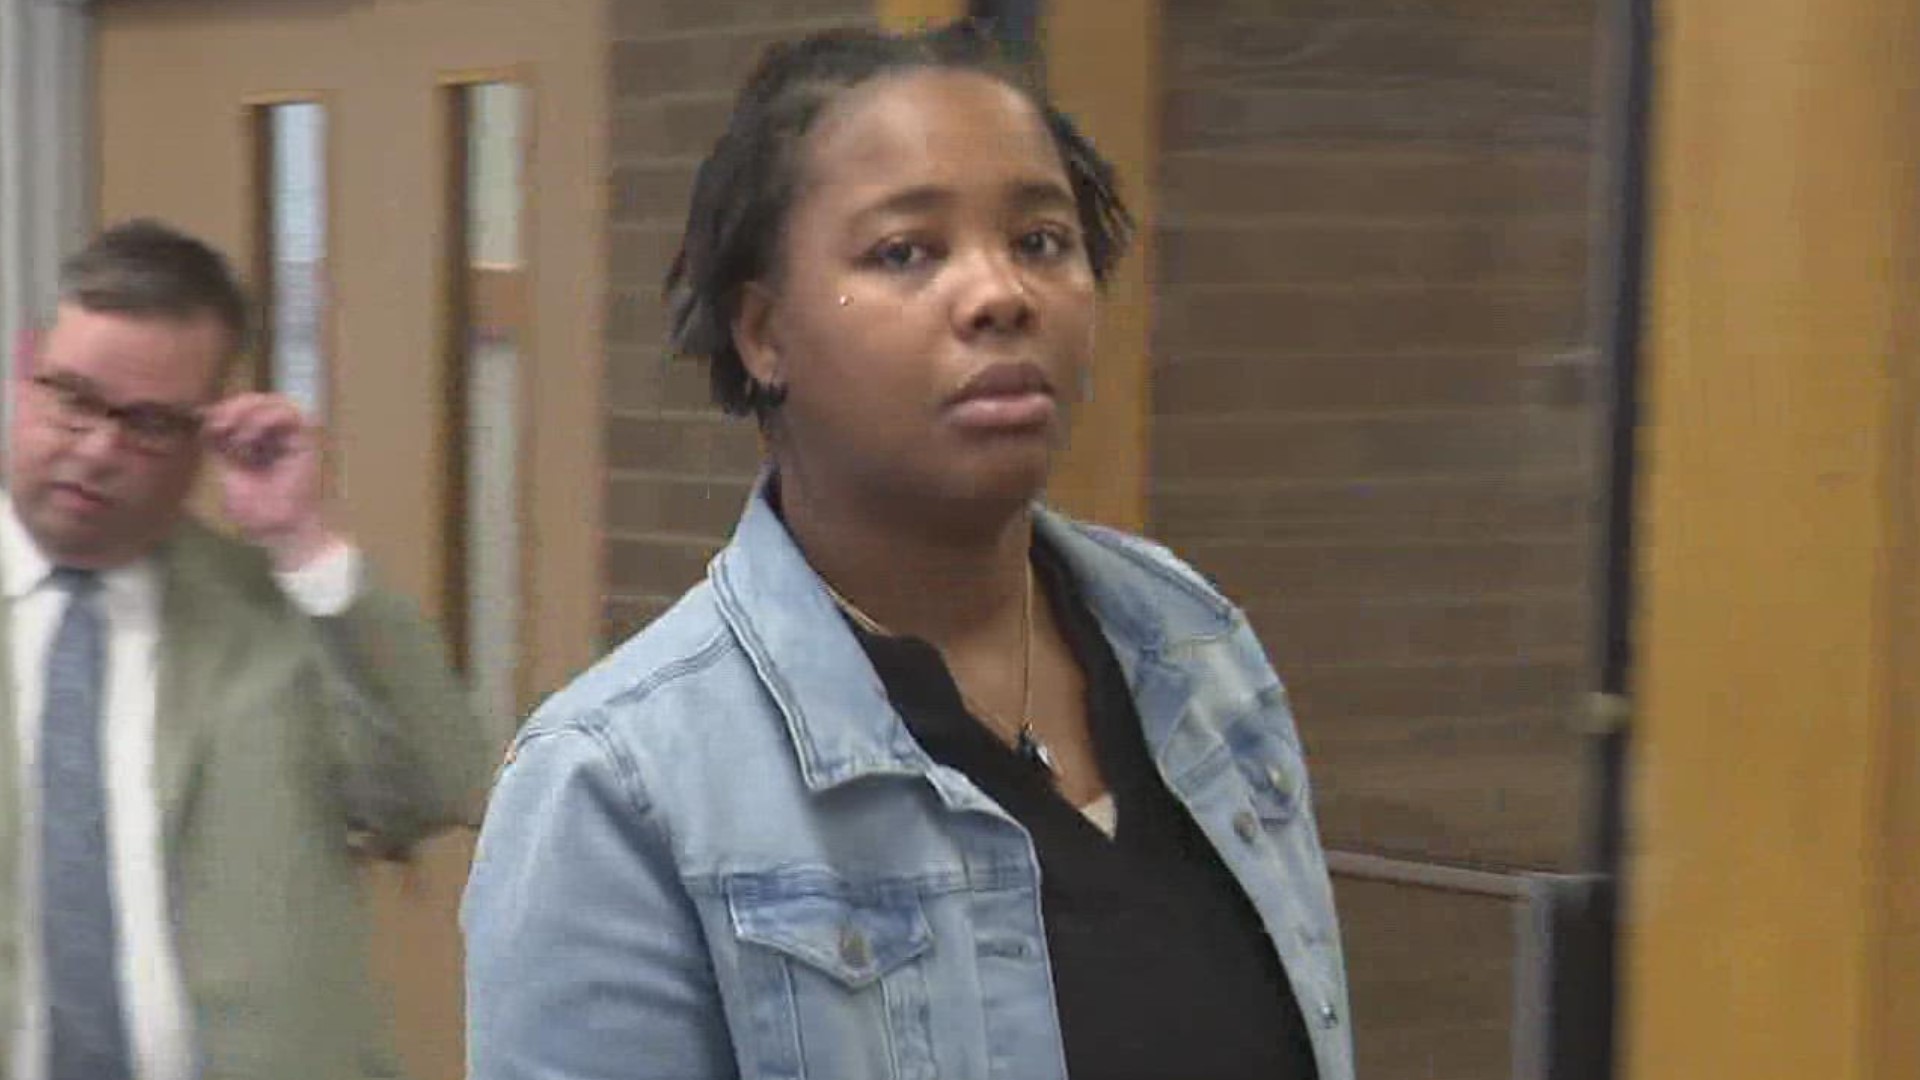 Tynicka Allen has been charged with causing the crash that killed two boys, including her son, during an Akron funeral procession.